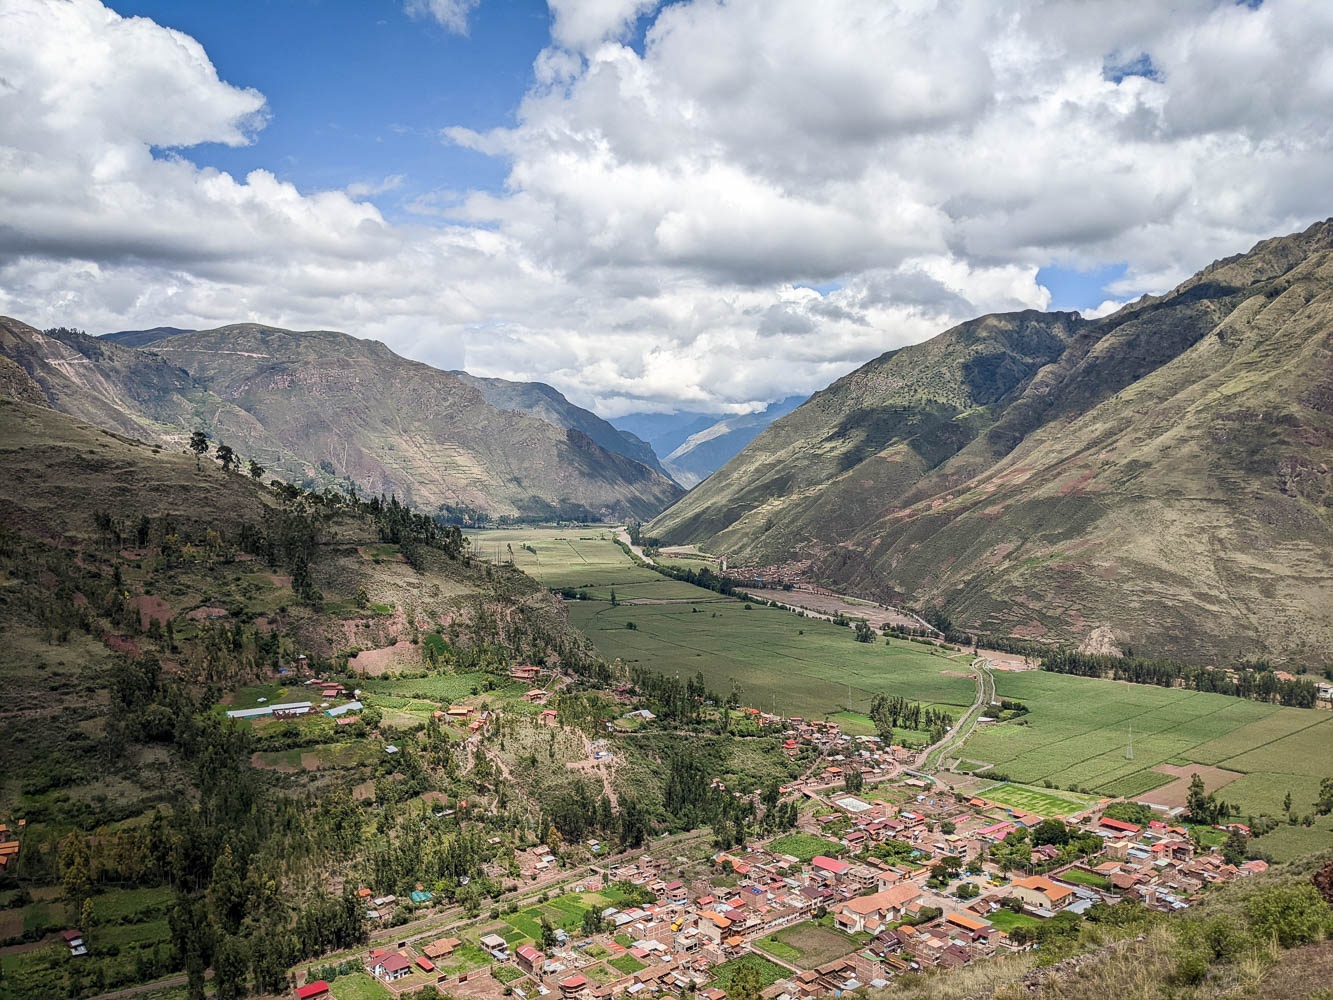 Urubamba River valley. Pisac is just out of sight to the right.